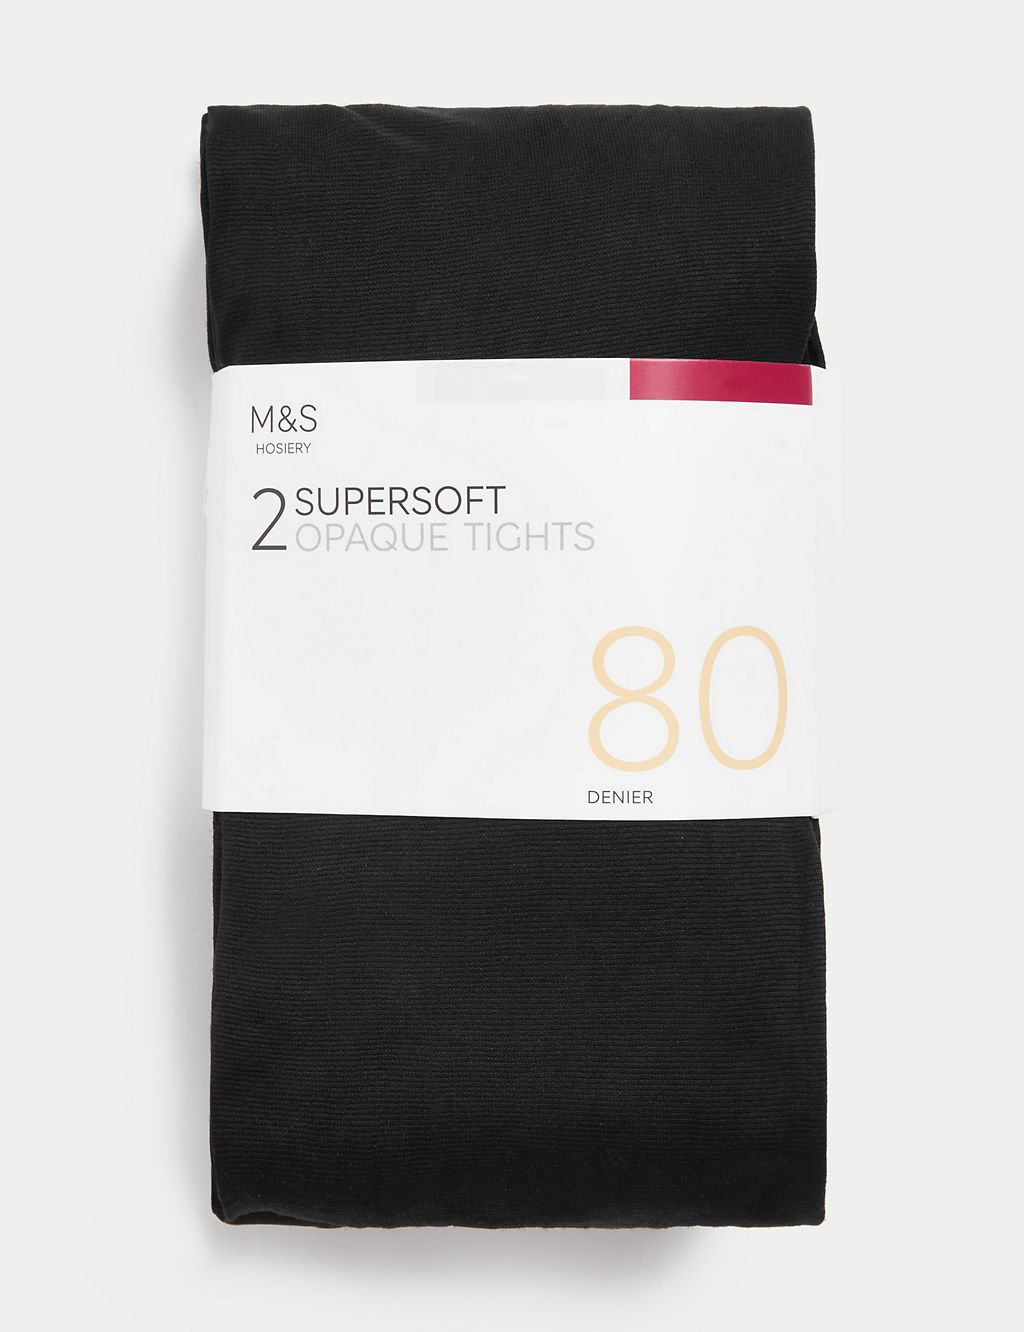 2pk 80 Denier Supersoft Opaque Tights 1 of 4